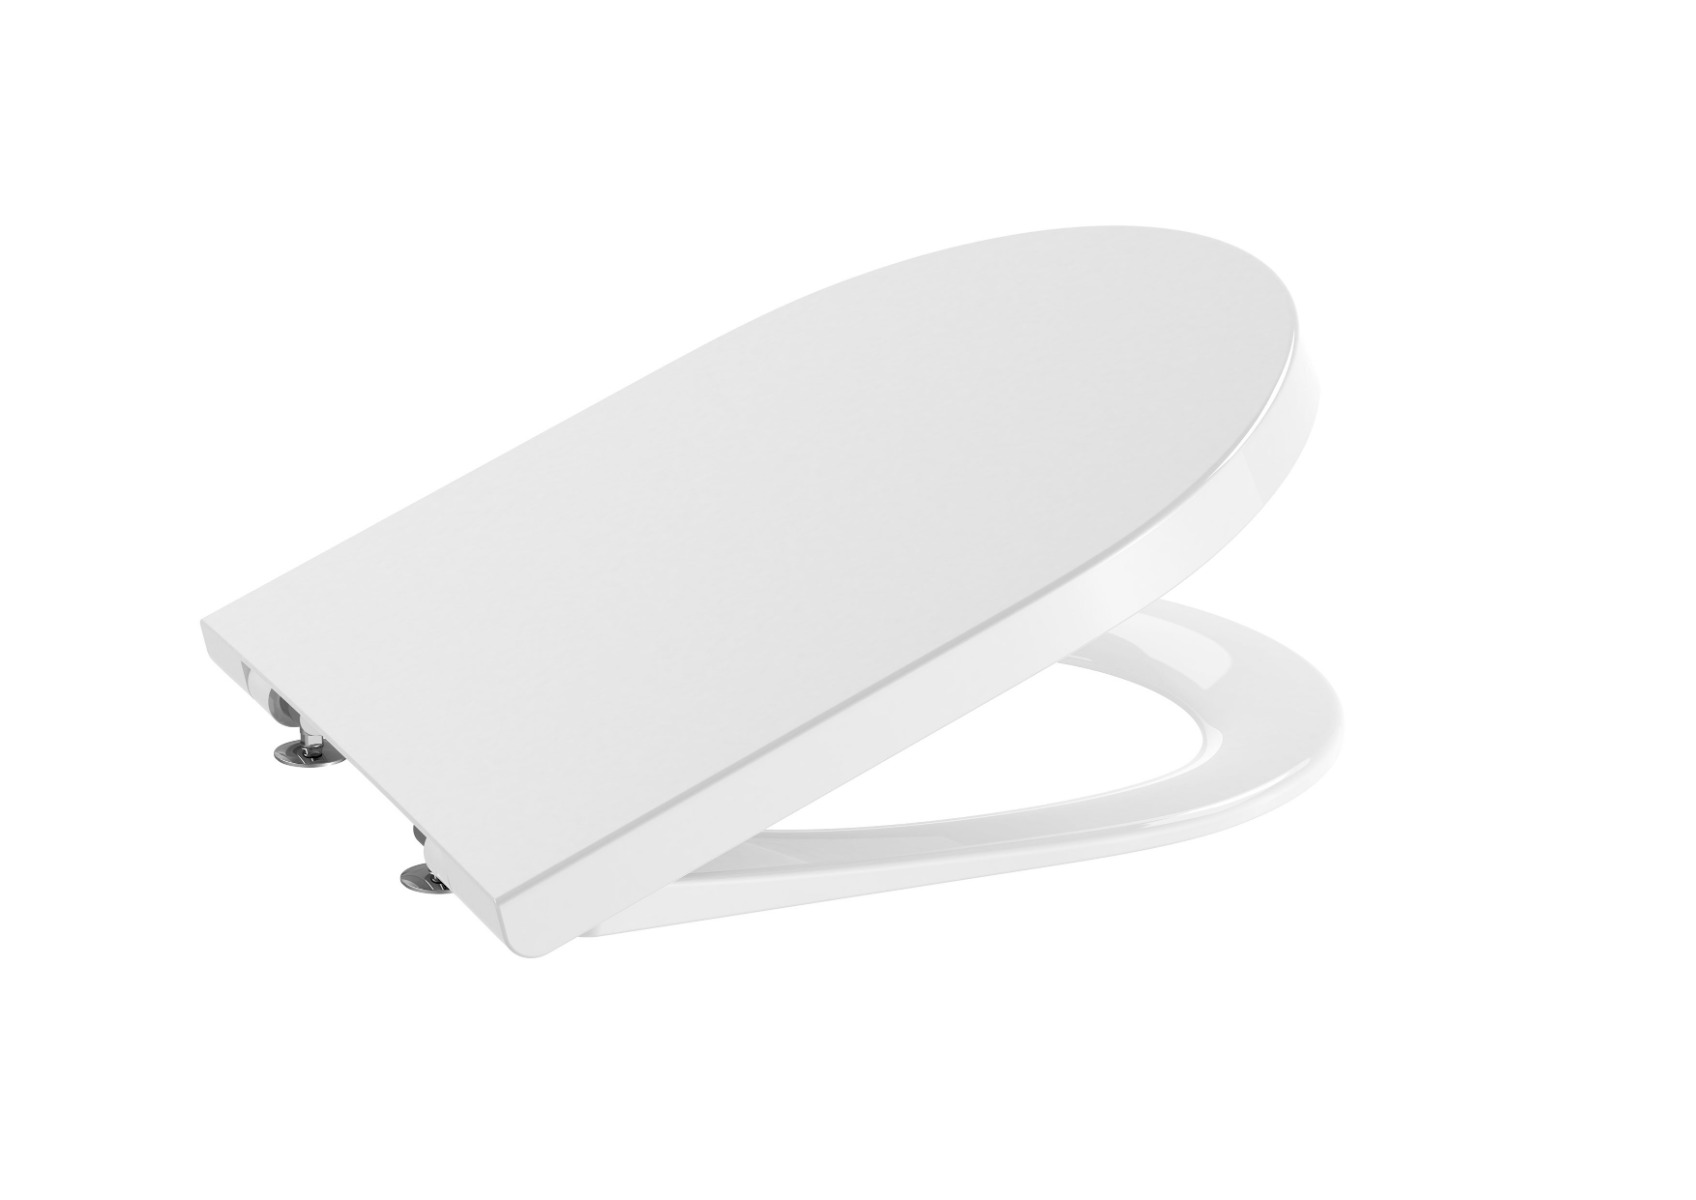 Soft-closing SUPRALIT toilet seat and cover